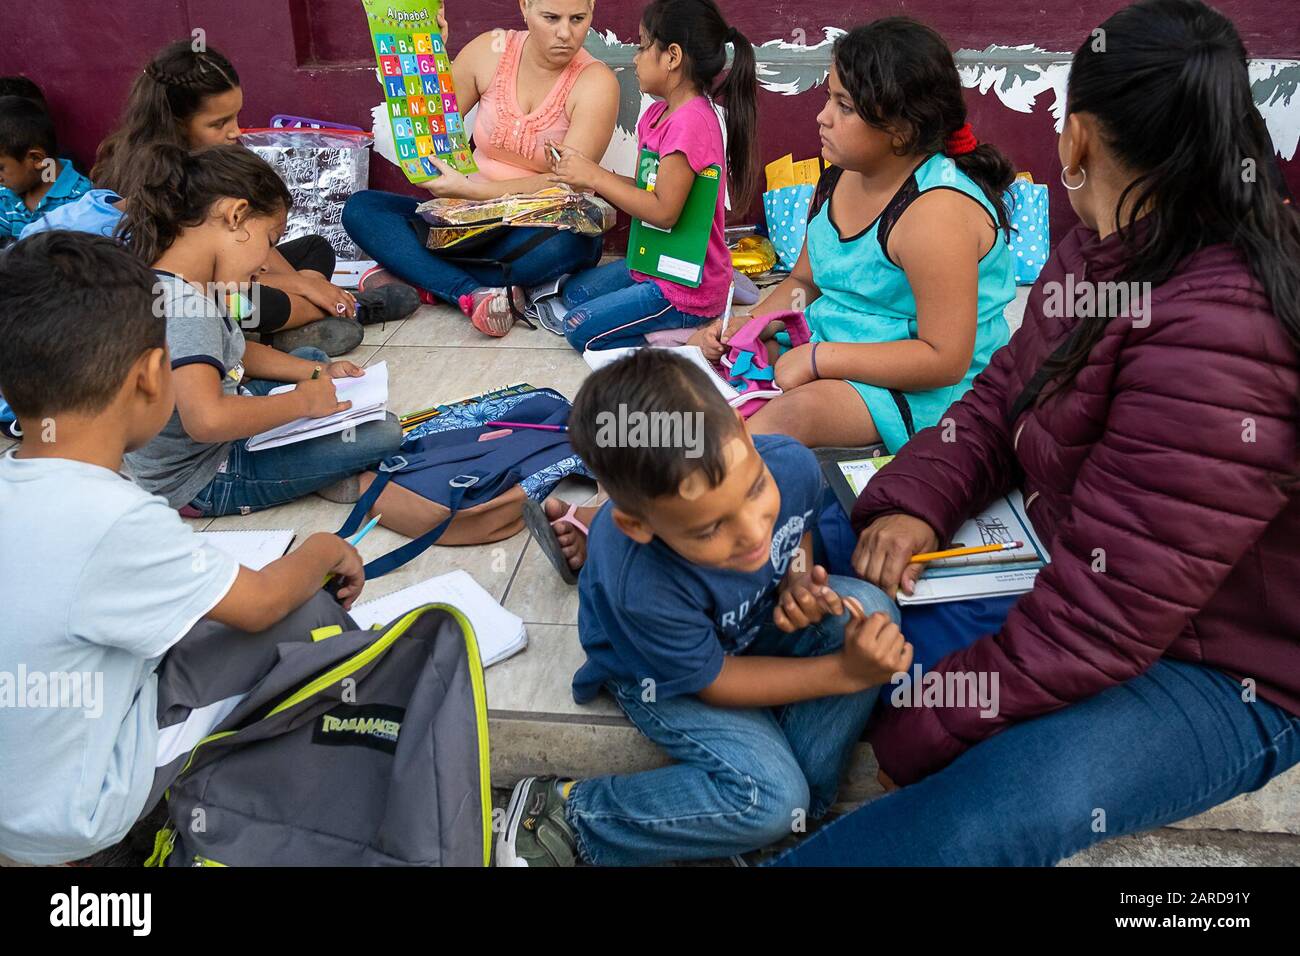 Children seeking asylum who are living in a tent city in Matamoros, Mexico, attend a sidewalk school. The school was organized by Felicia Rangel-Samponaro used to be a teacher in Houston, Texas. The sidewalk school employs asylum seekers as teachers. Stock Photo